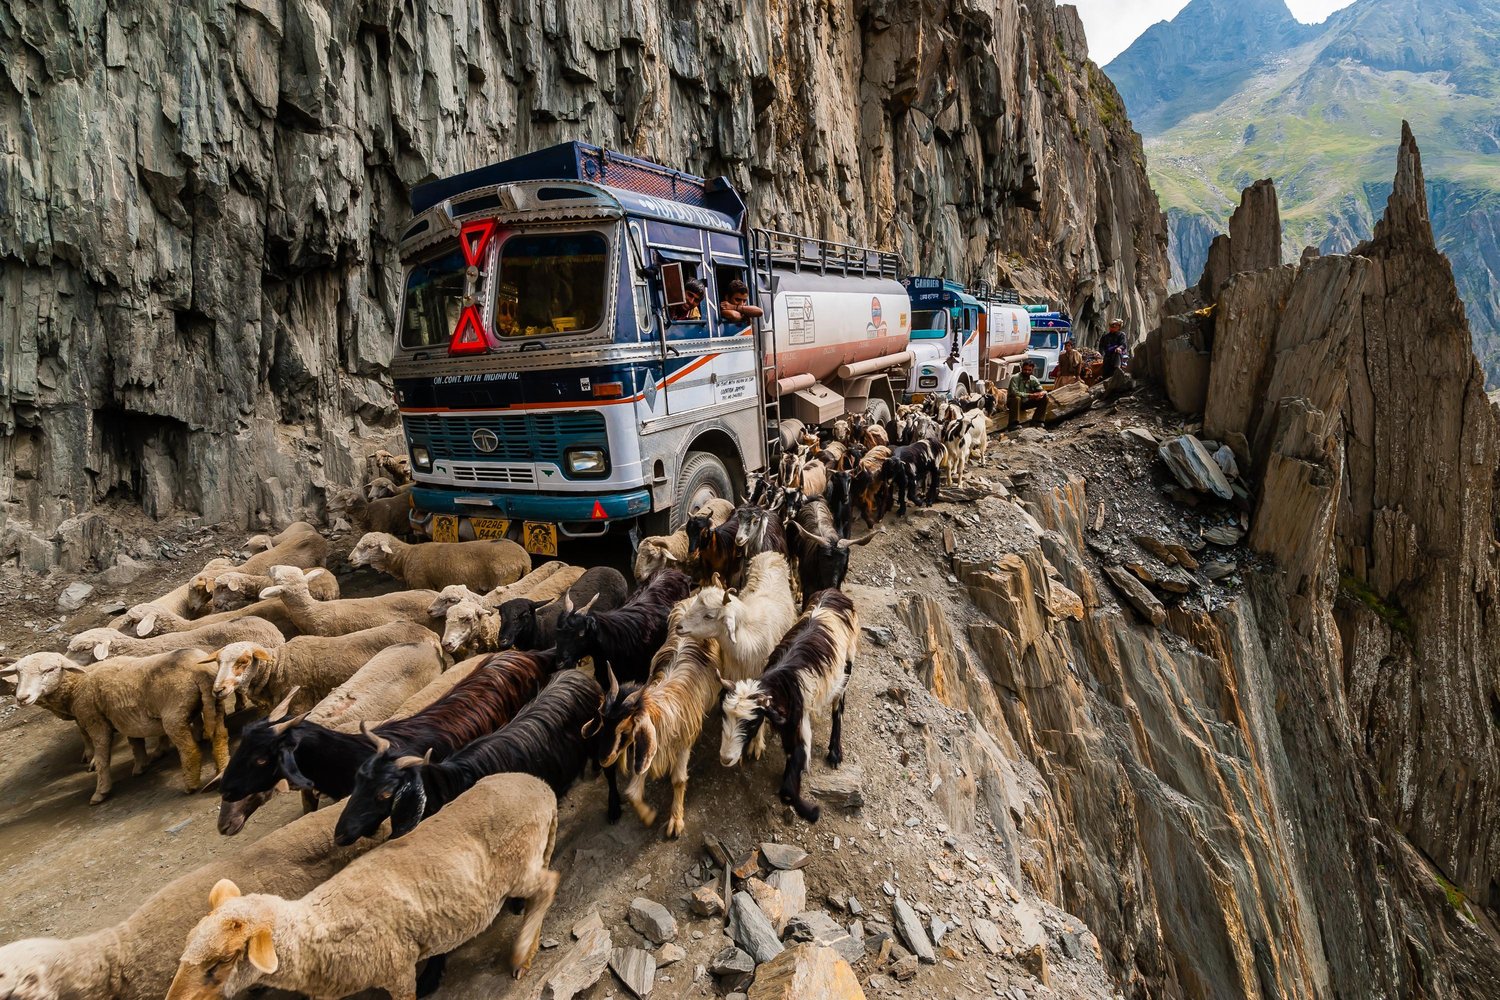 Sheep and goats being herded over the Zojila Pass as a traffic jam idles trucks because of a landslide; Kashmir, Jammu and Kashmir State; India.